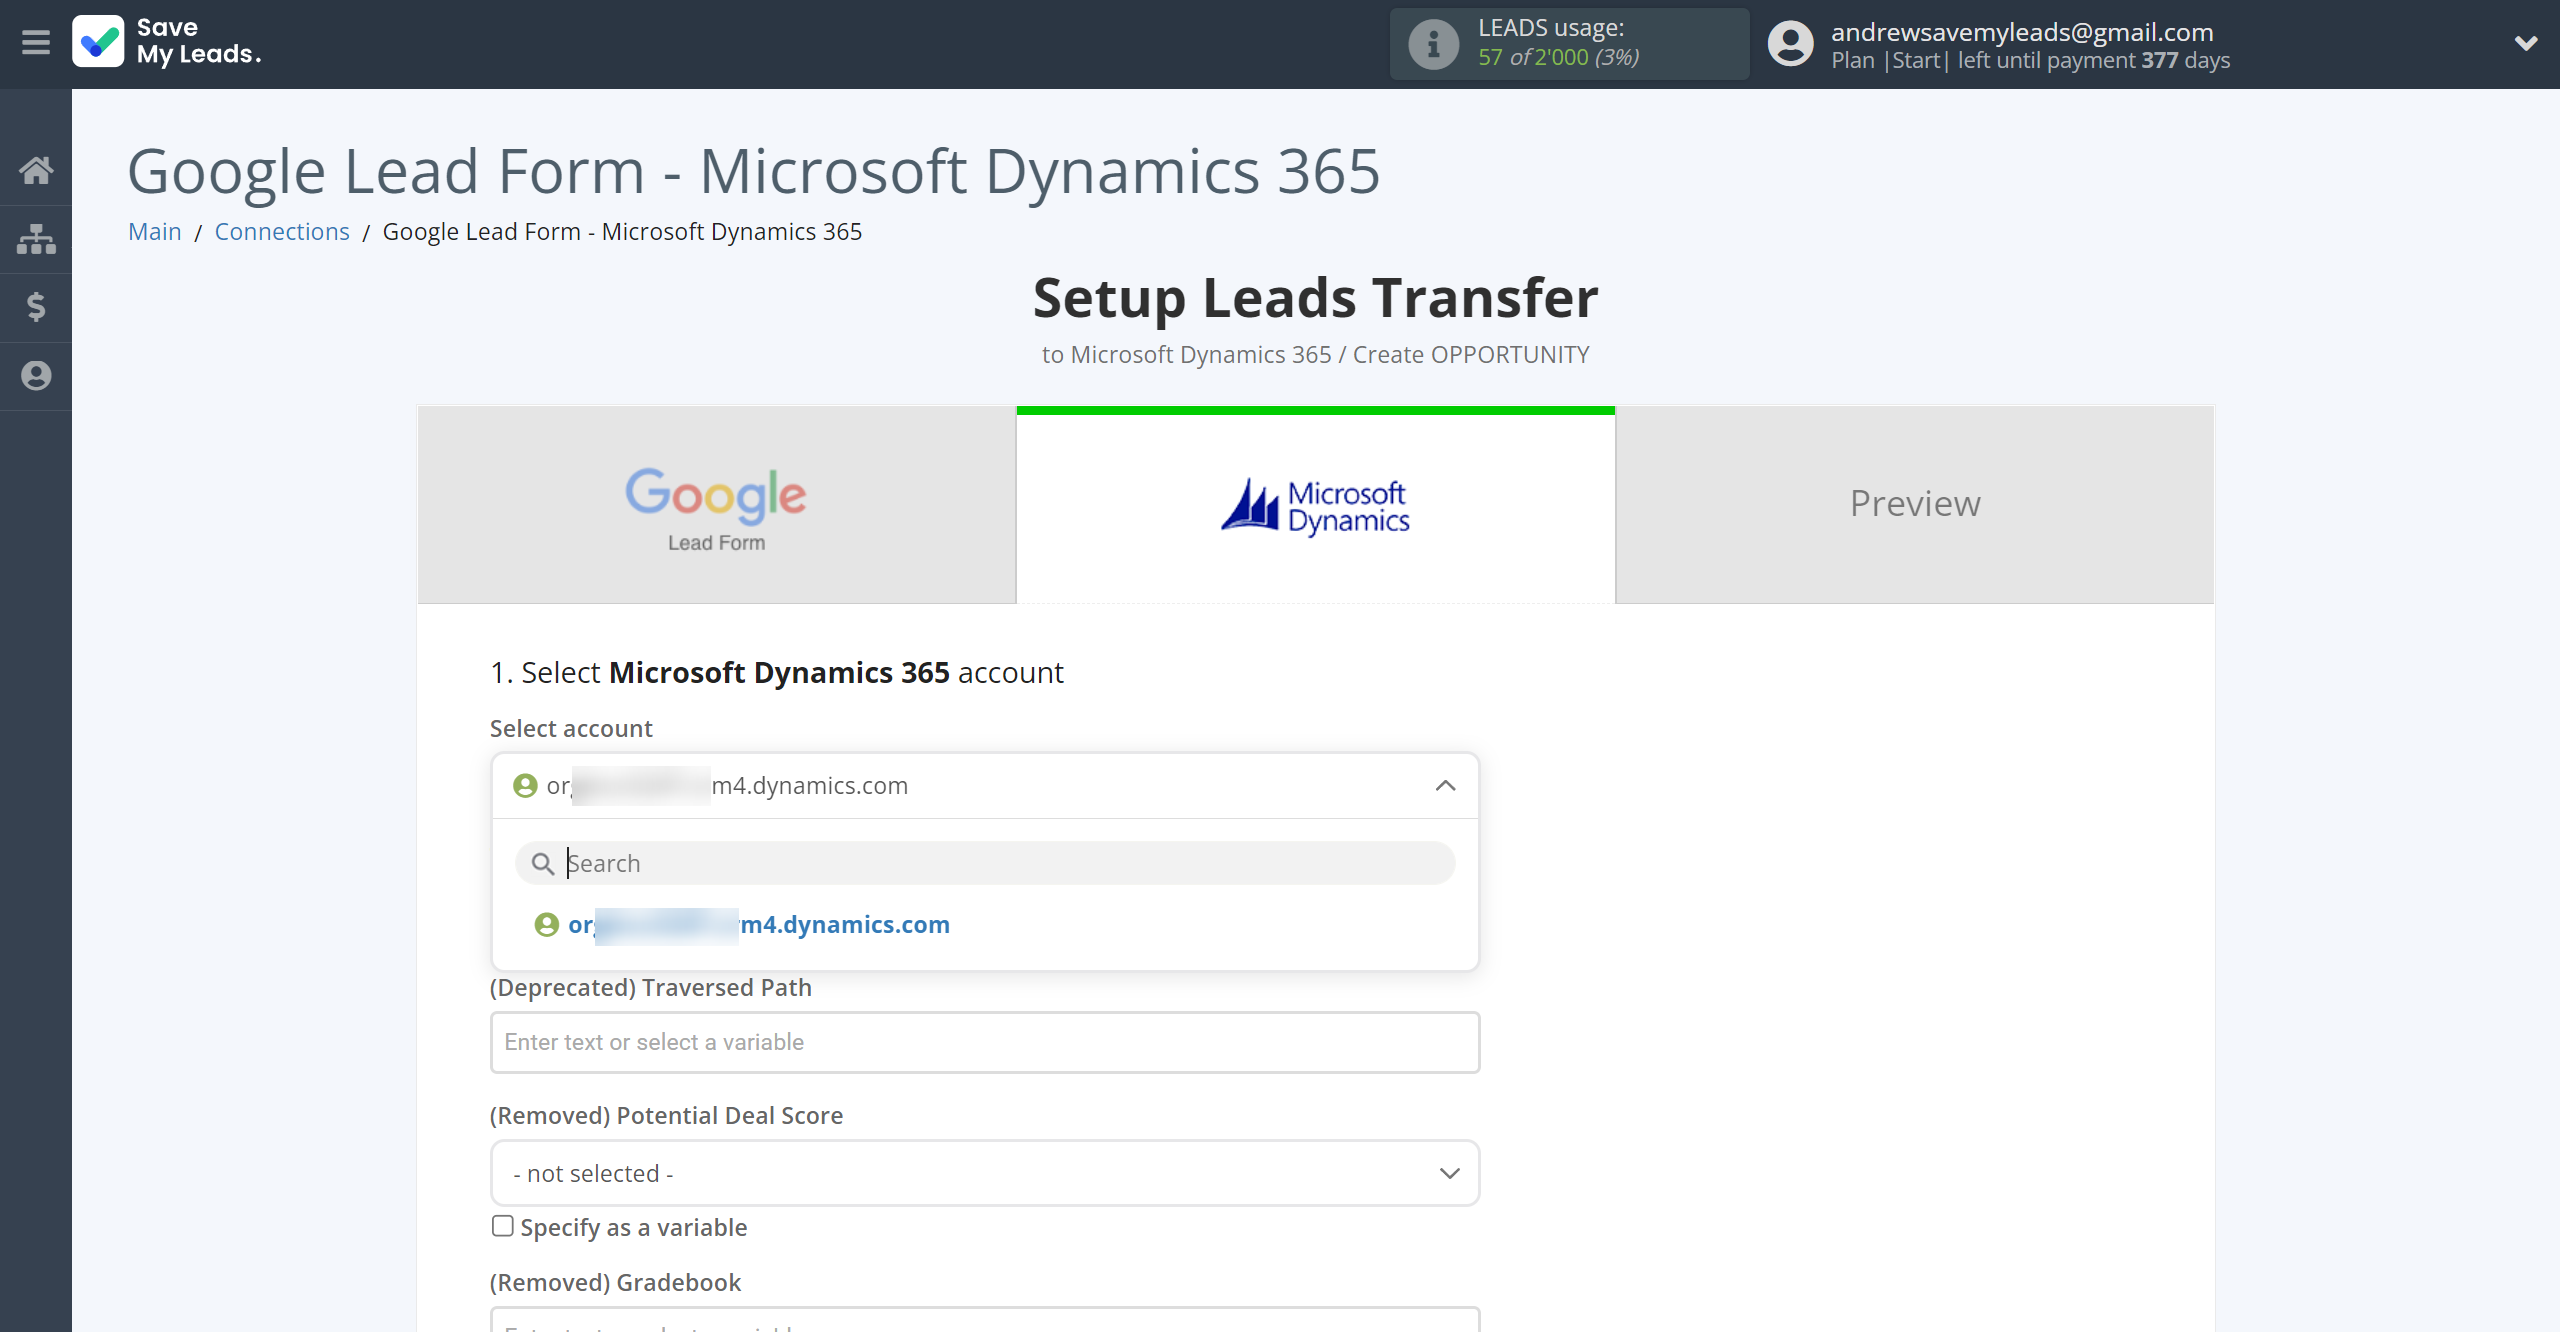 How to Connect Google Lead Form with Microsoft Dynamics 365 Create Opportunity | Data Destination account selection